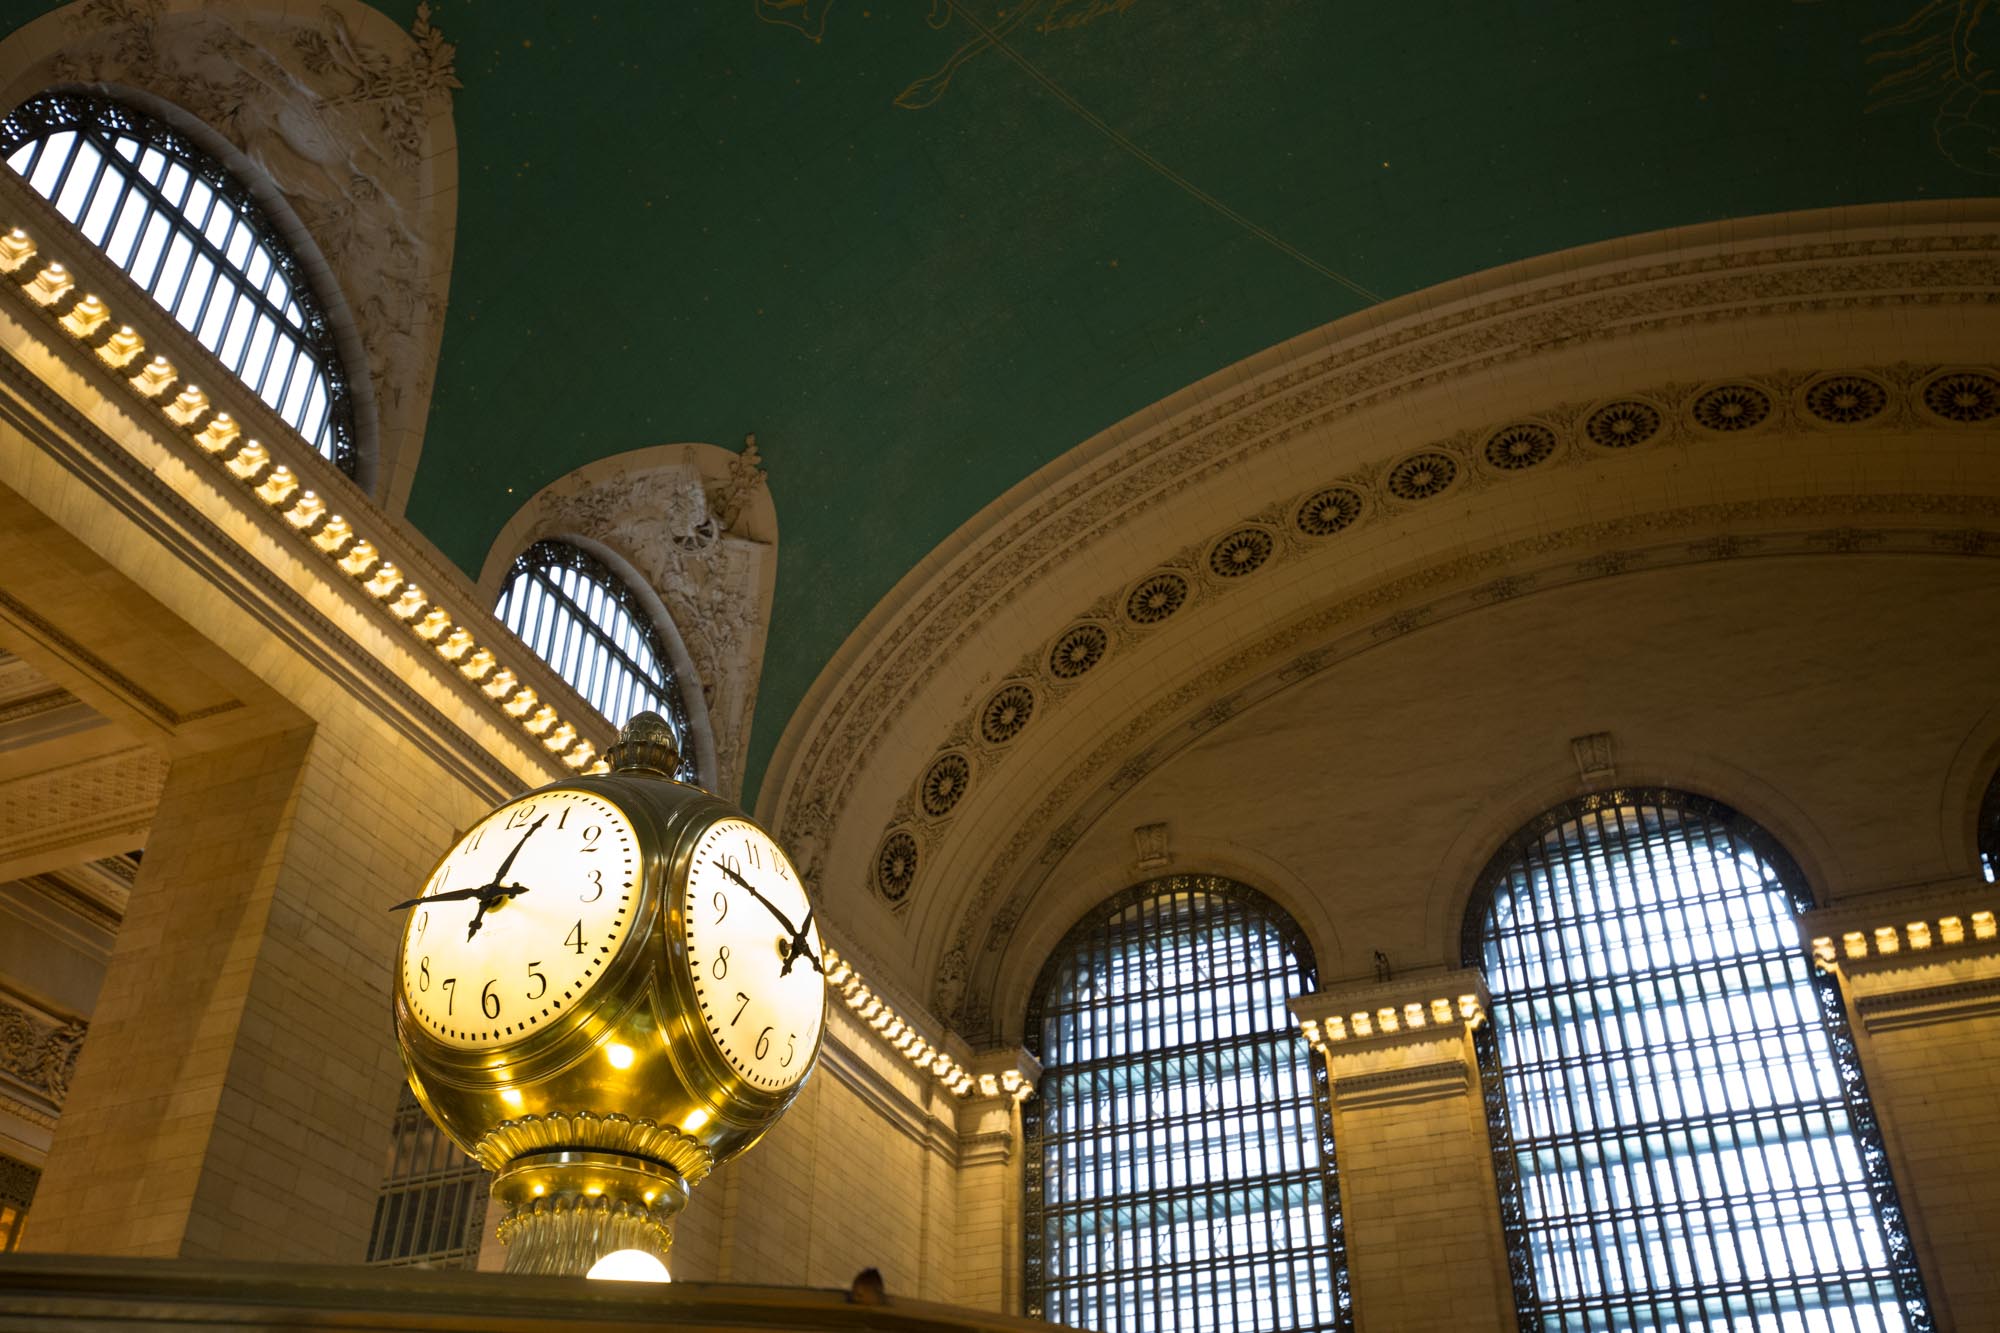 Secret Behind the Scenes Grand Central Terminal Tour - Behind the Scenes  NYC (BTSNYC)